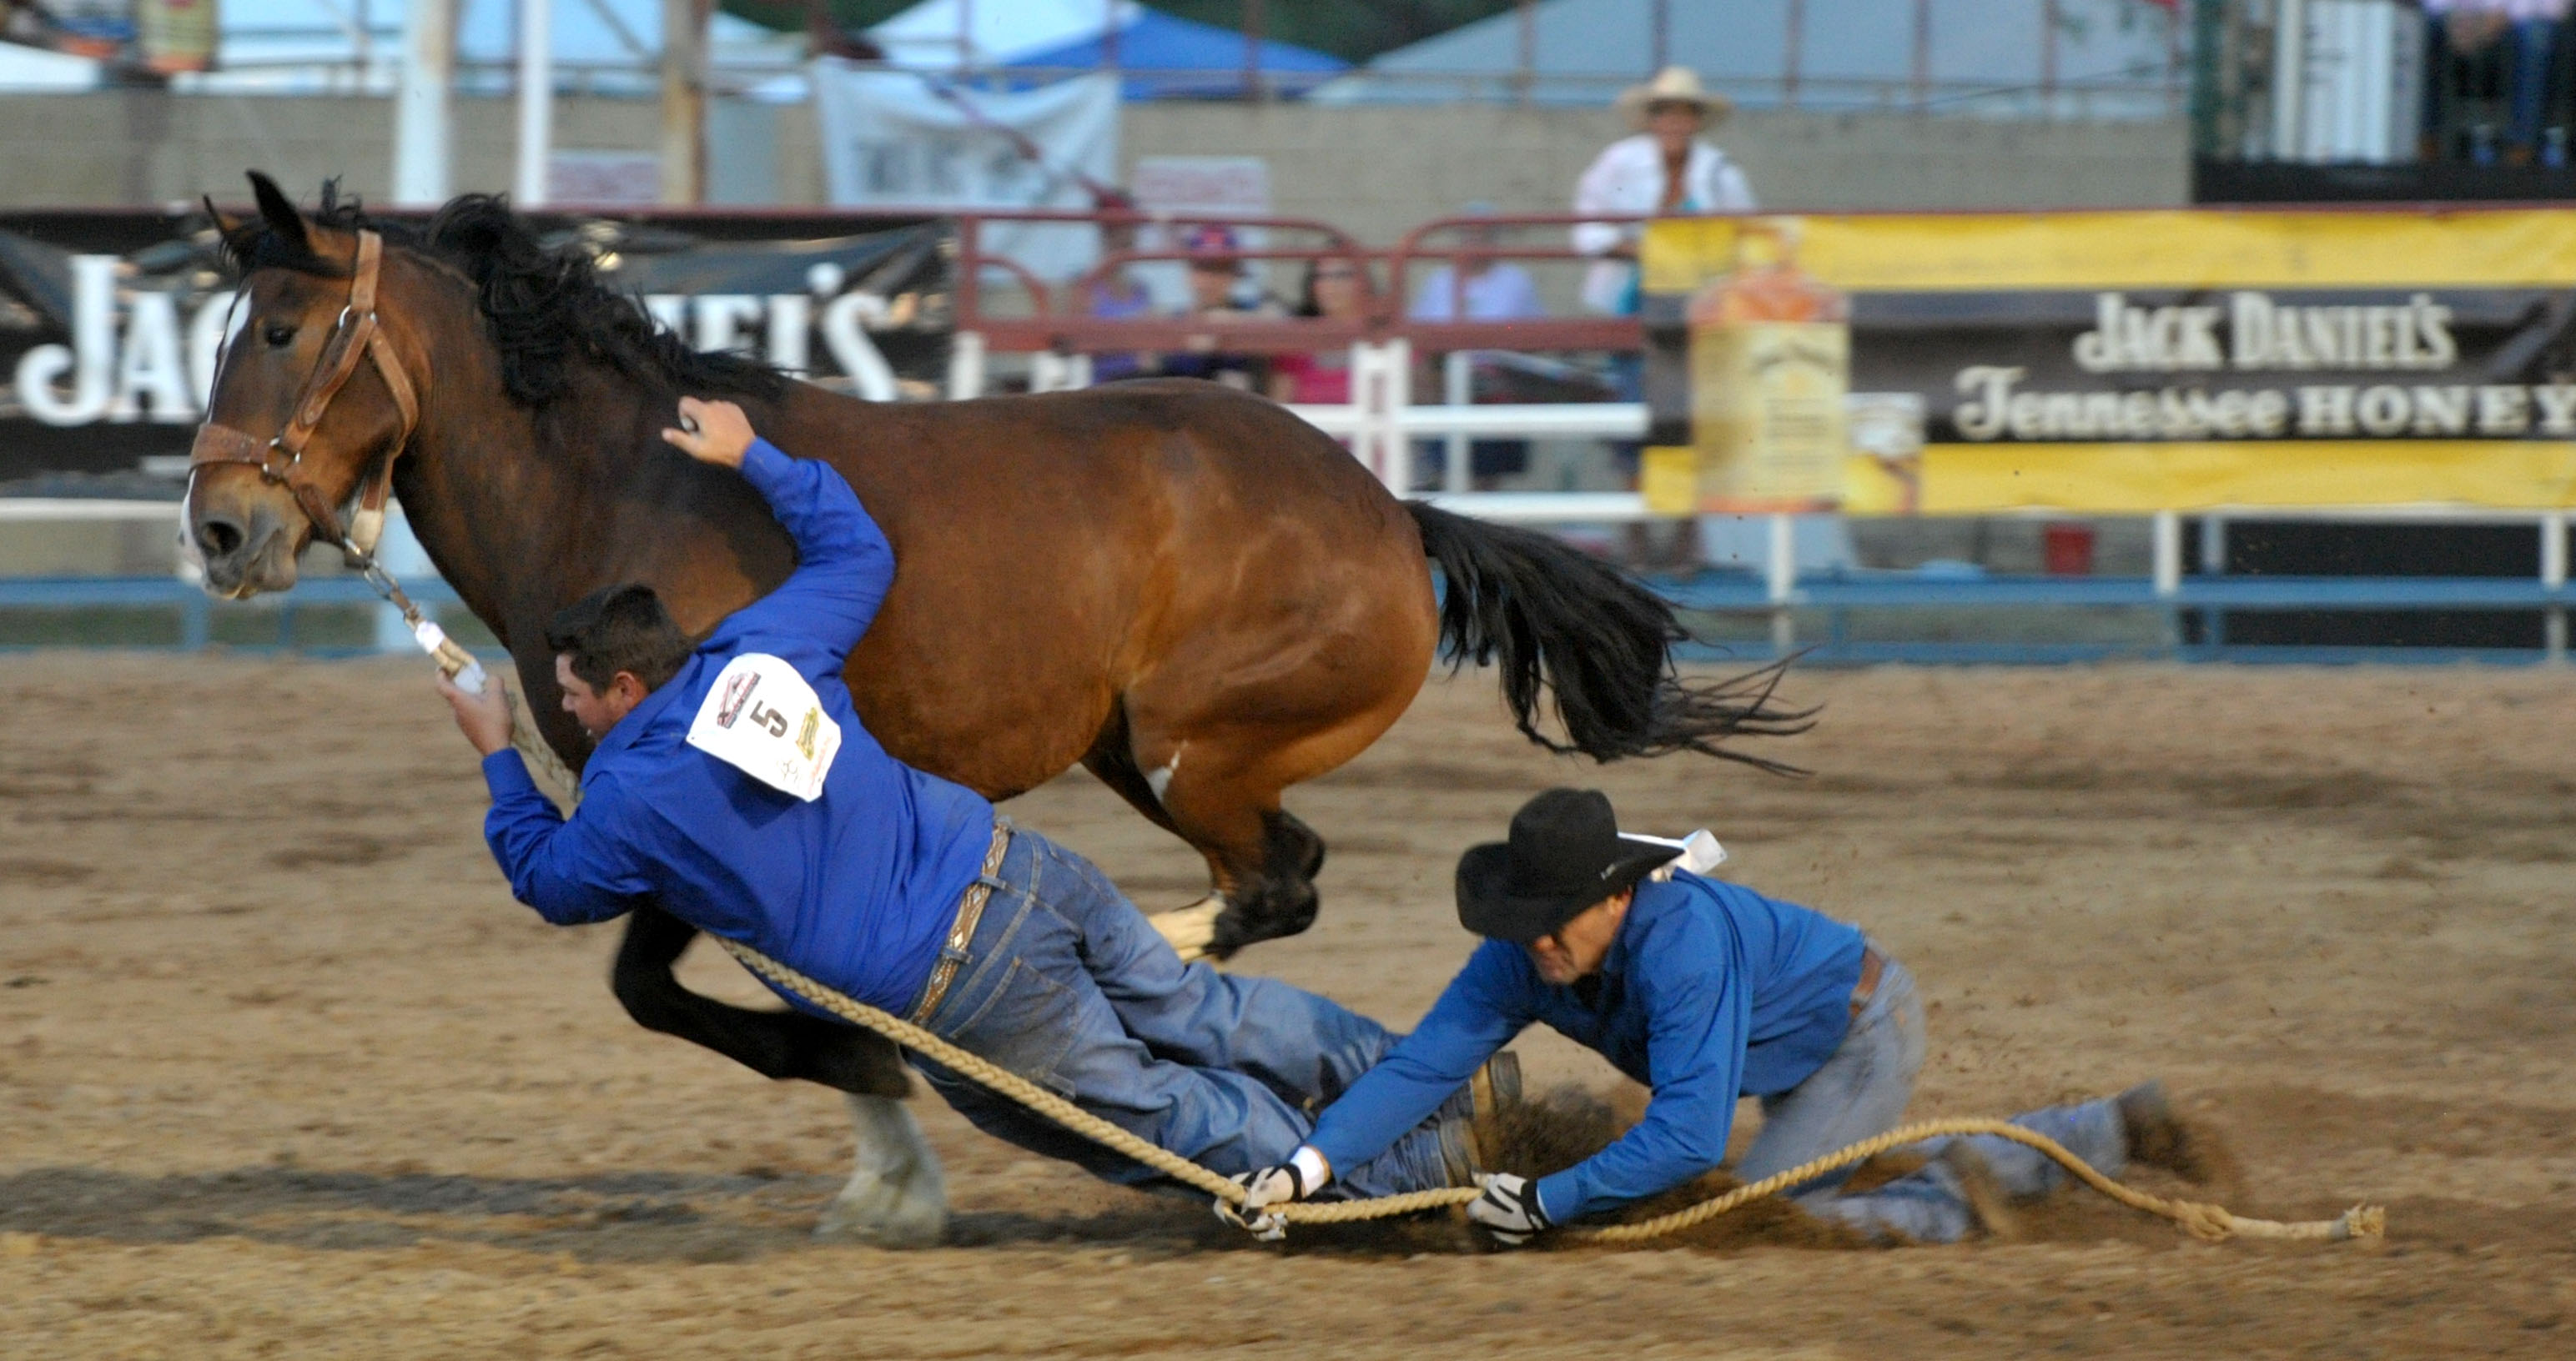 Wild Horse Race gets each rodeo performance off to a rowdy start The